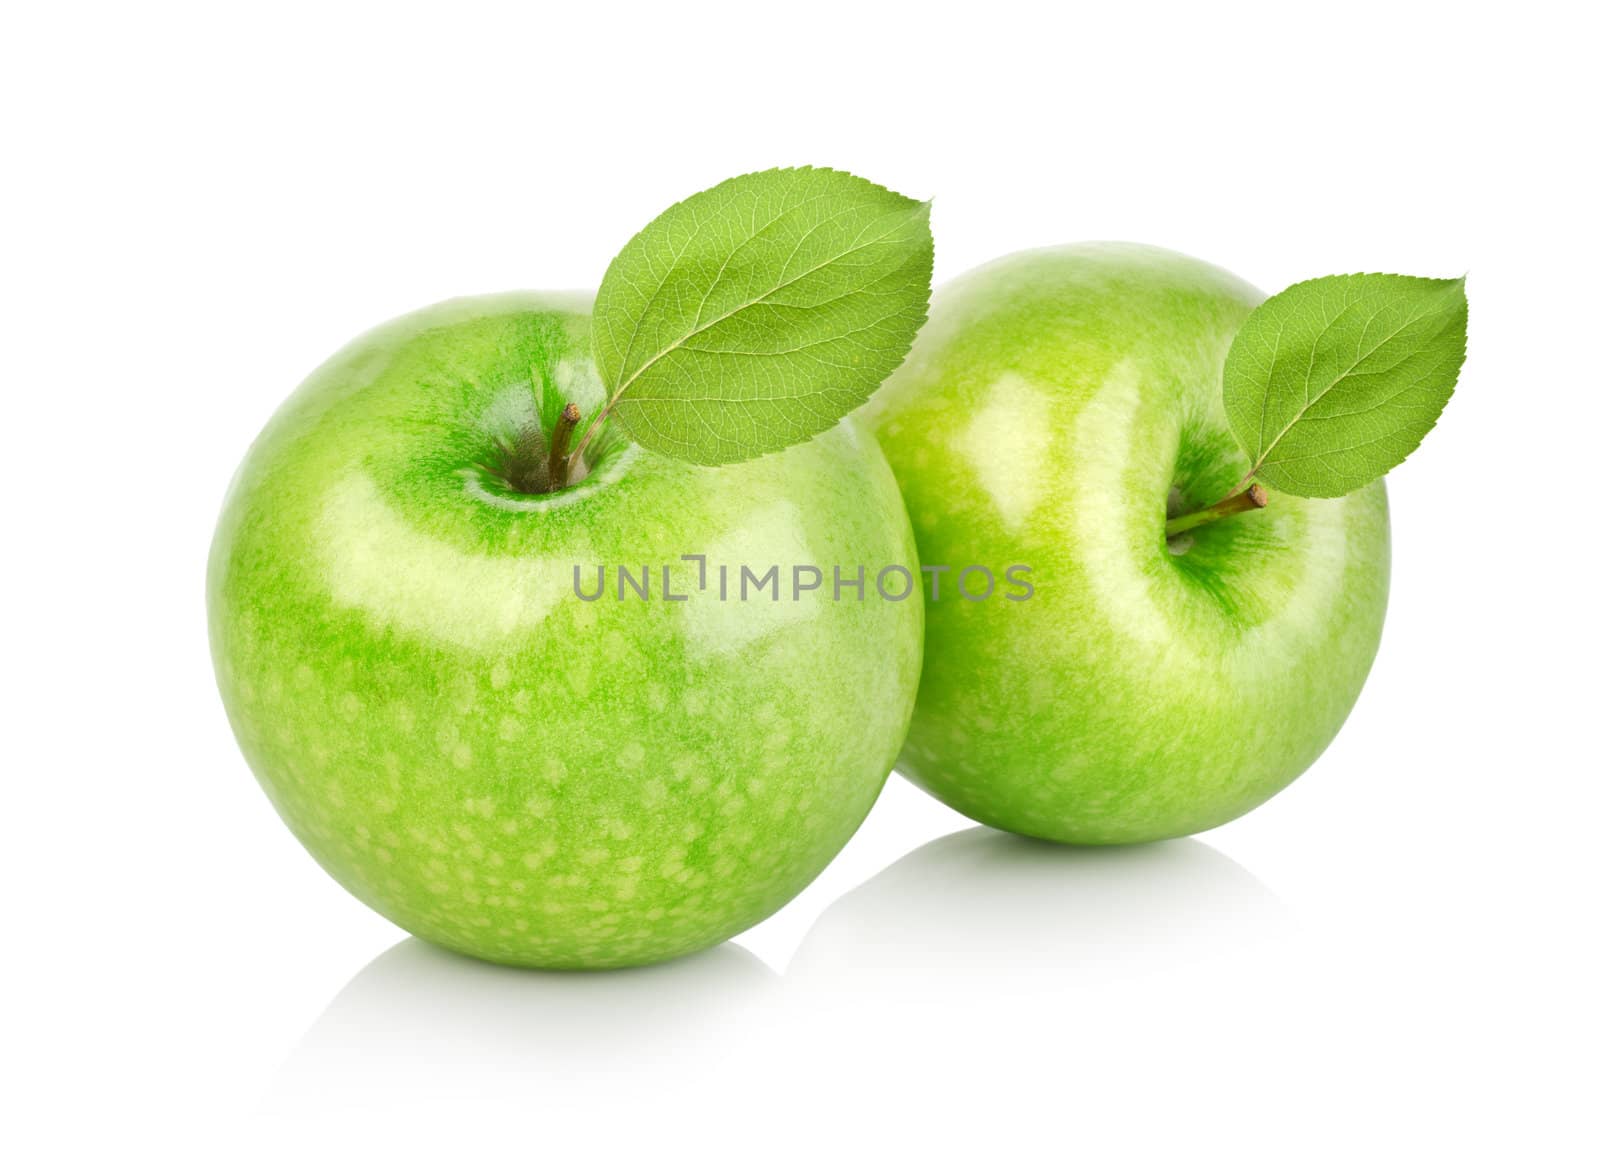 Two green apples with leaves isolated on a white background